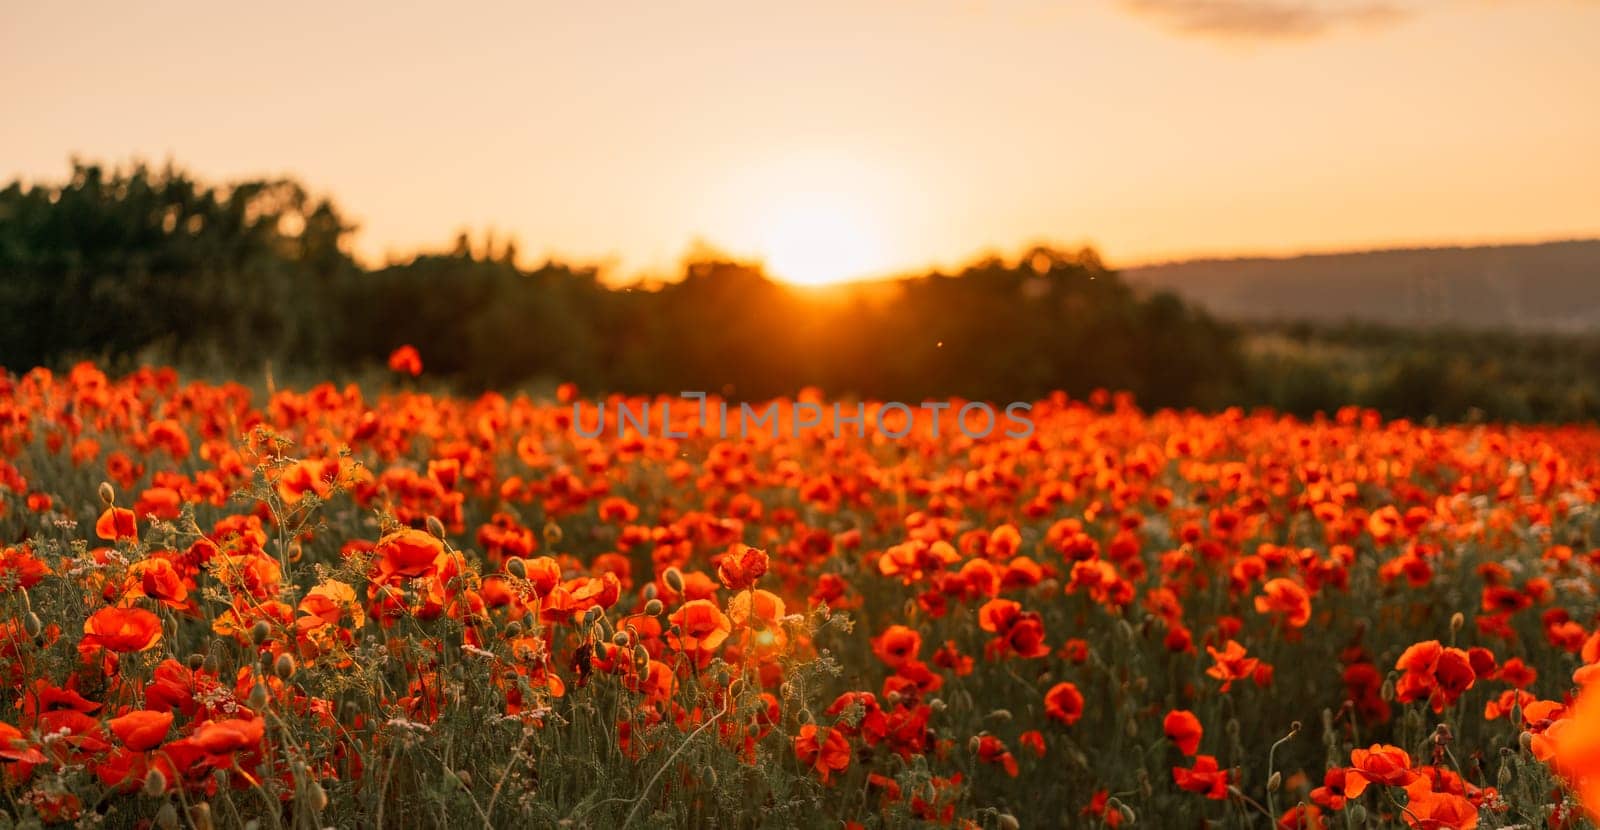 Field poppies sunset light banner. Red poppies flowers bloom in meadow. Concept nature, environment, ecosystem